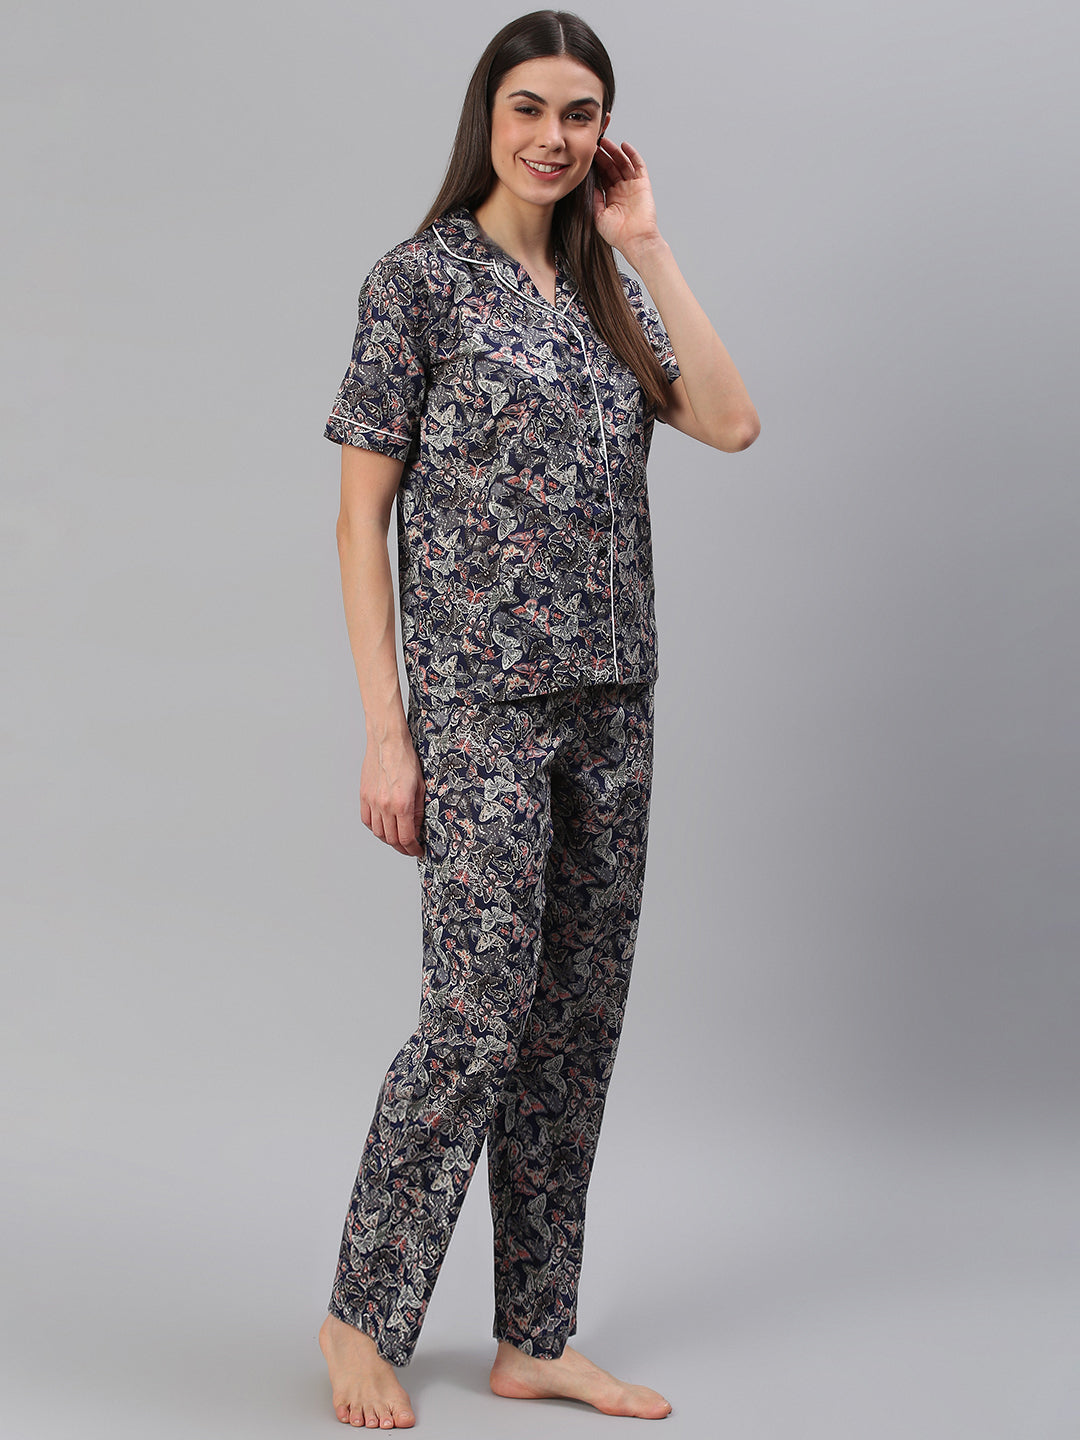 Cation Navy Printed Night Suit